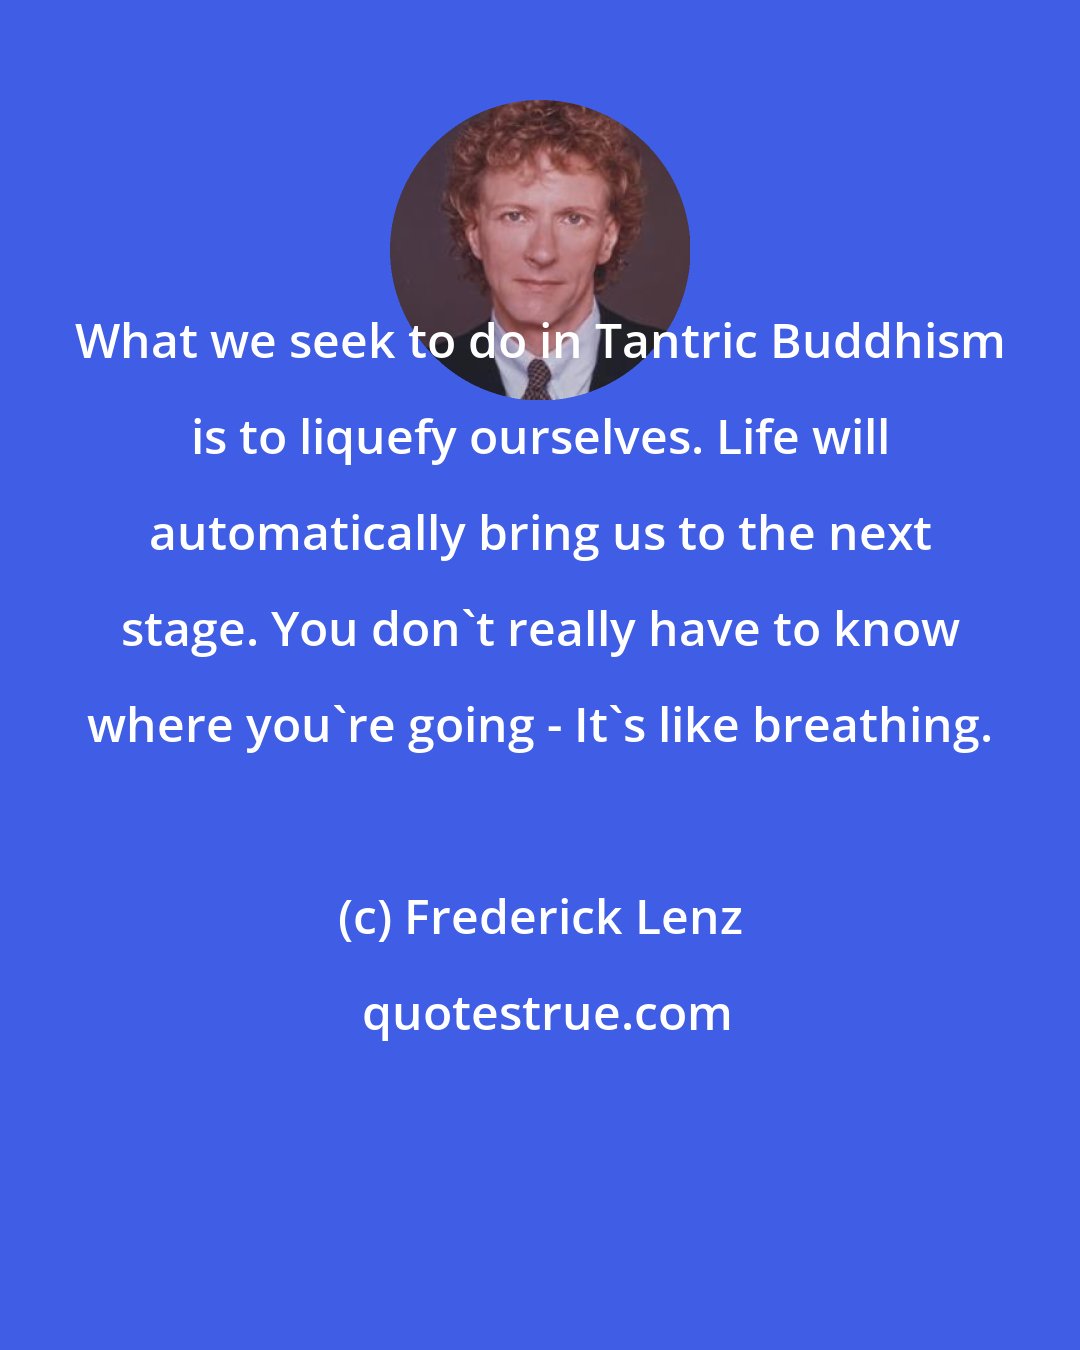 Frederick Lenz: What we seek to do in Tantric Buddhism is to liquefy ourselves. Life will automatically bring us to the next stage. You don't really have to know where you're going - It's like breathing.